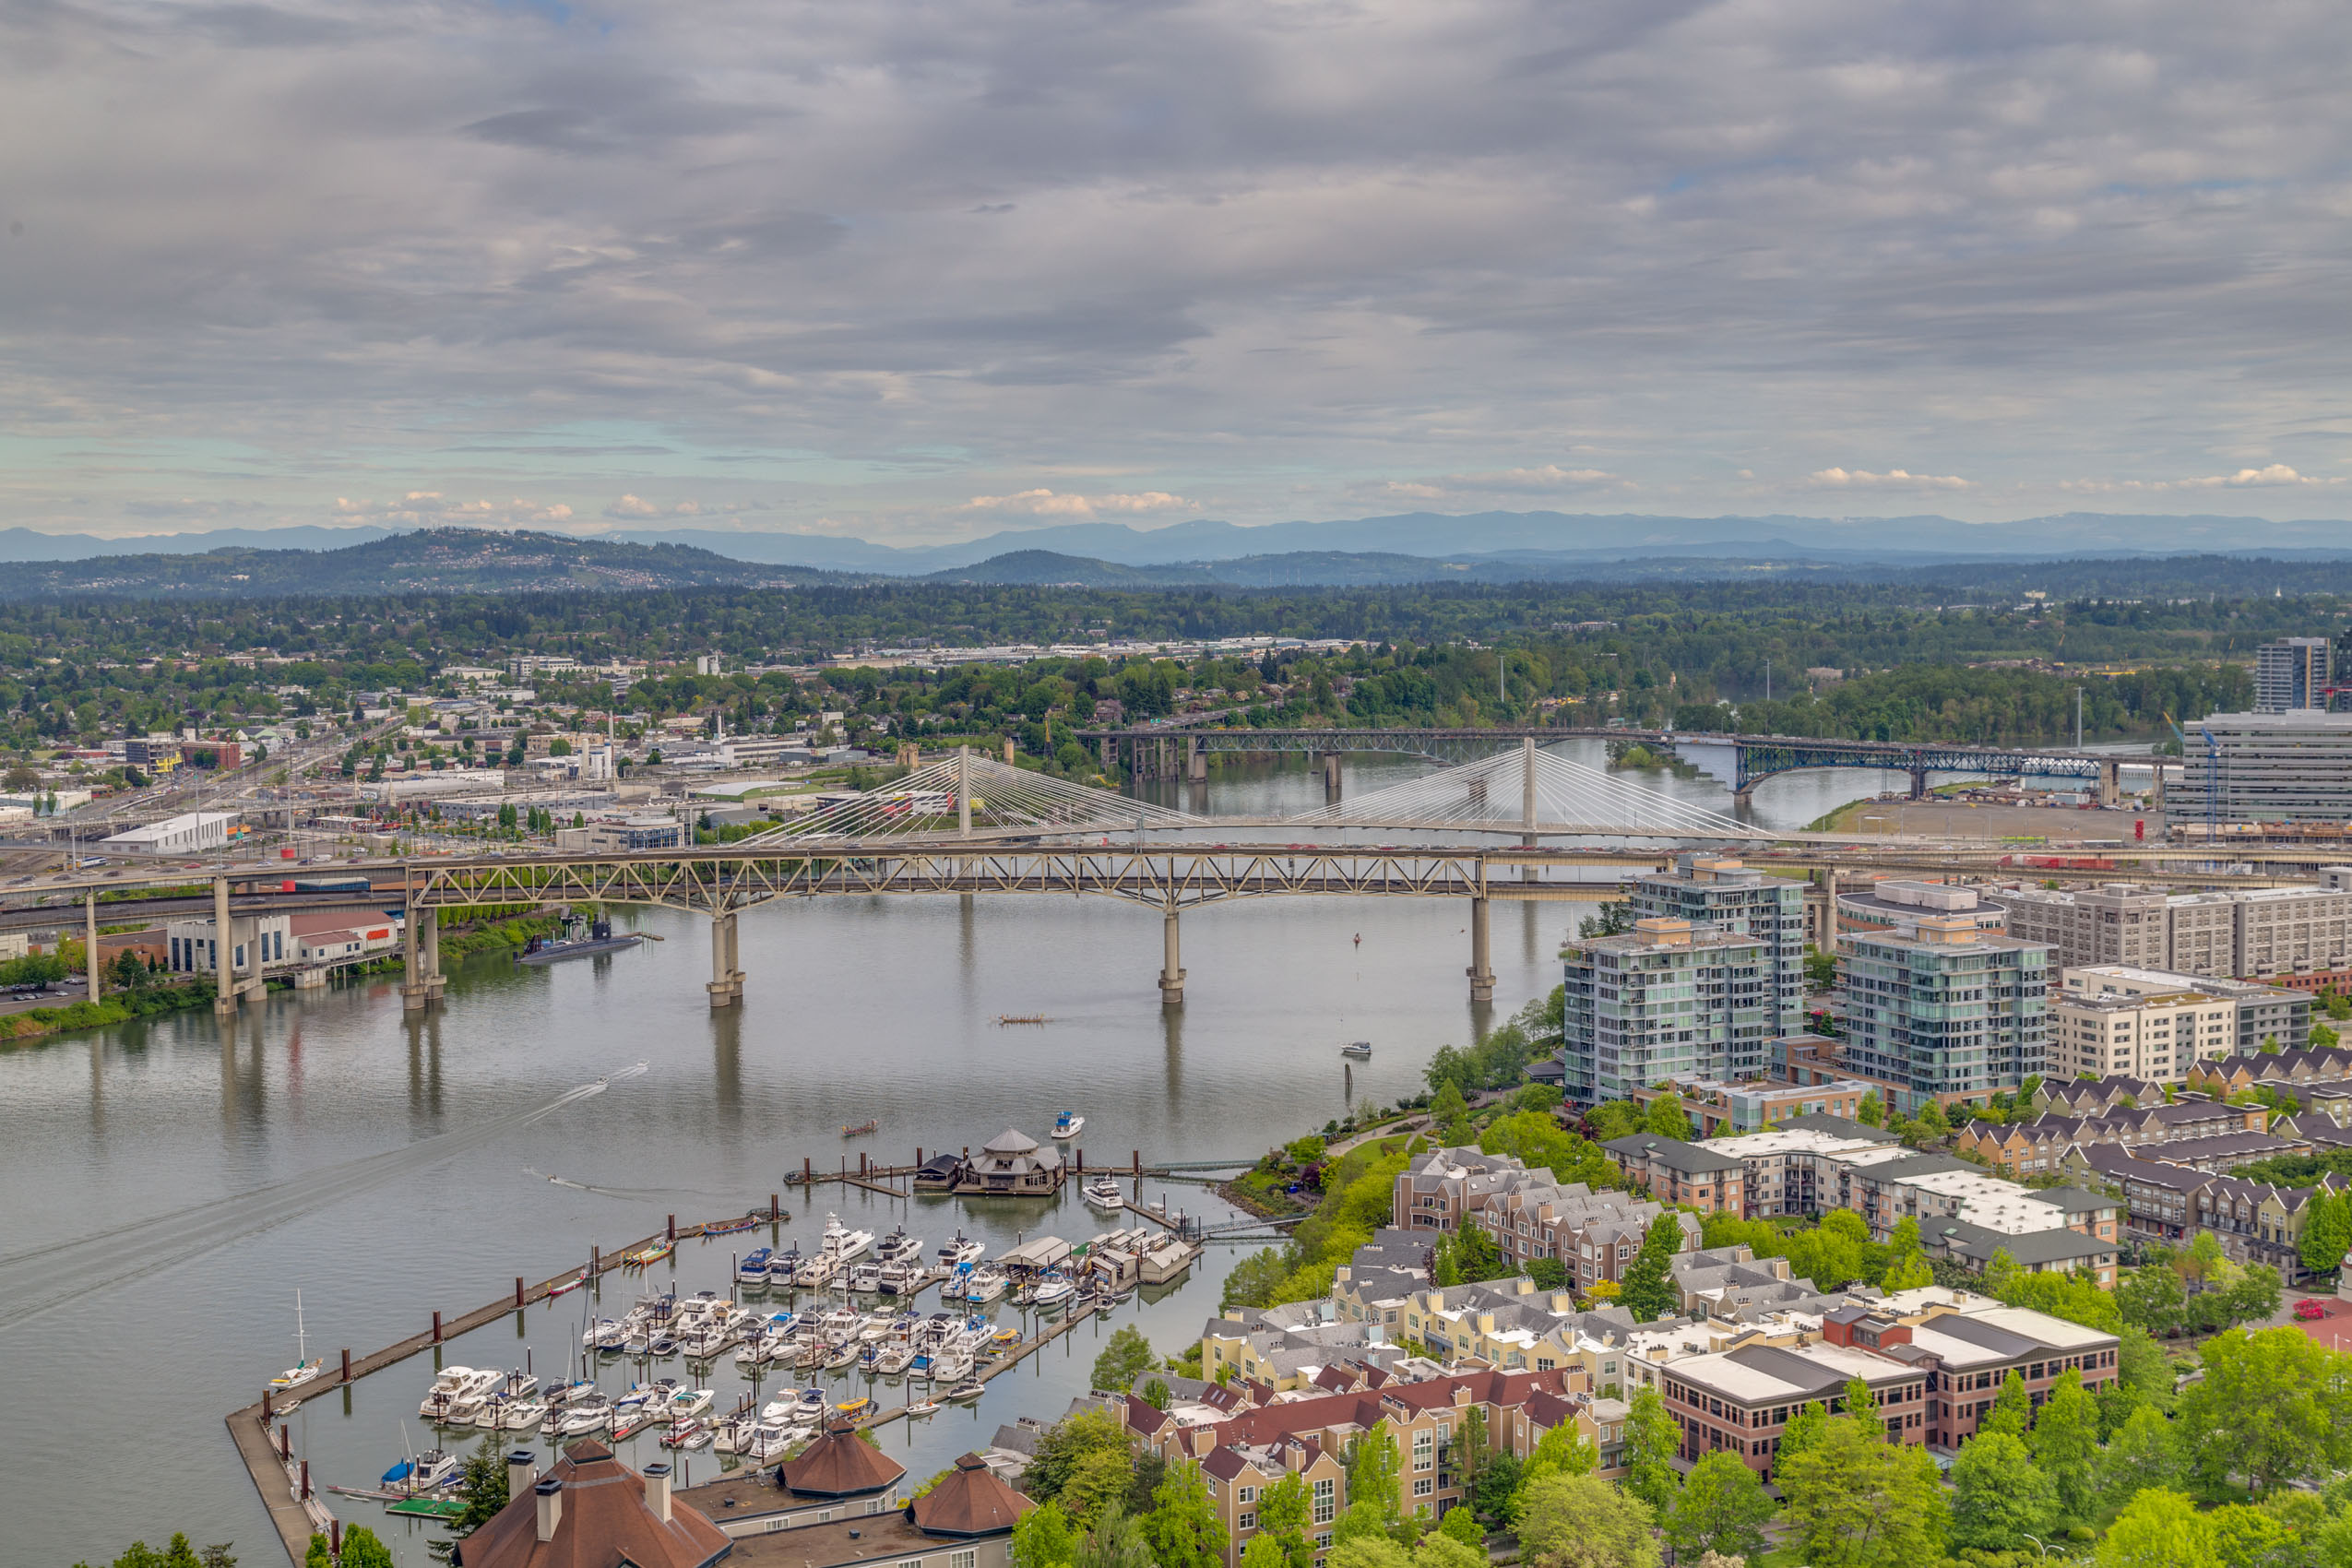 Cascade Sotheby's closes sale on exquisite luxury penthouse in Portland, Oregon